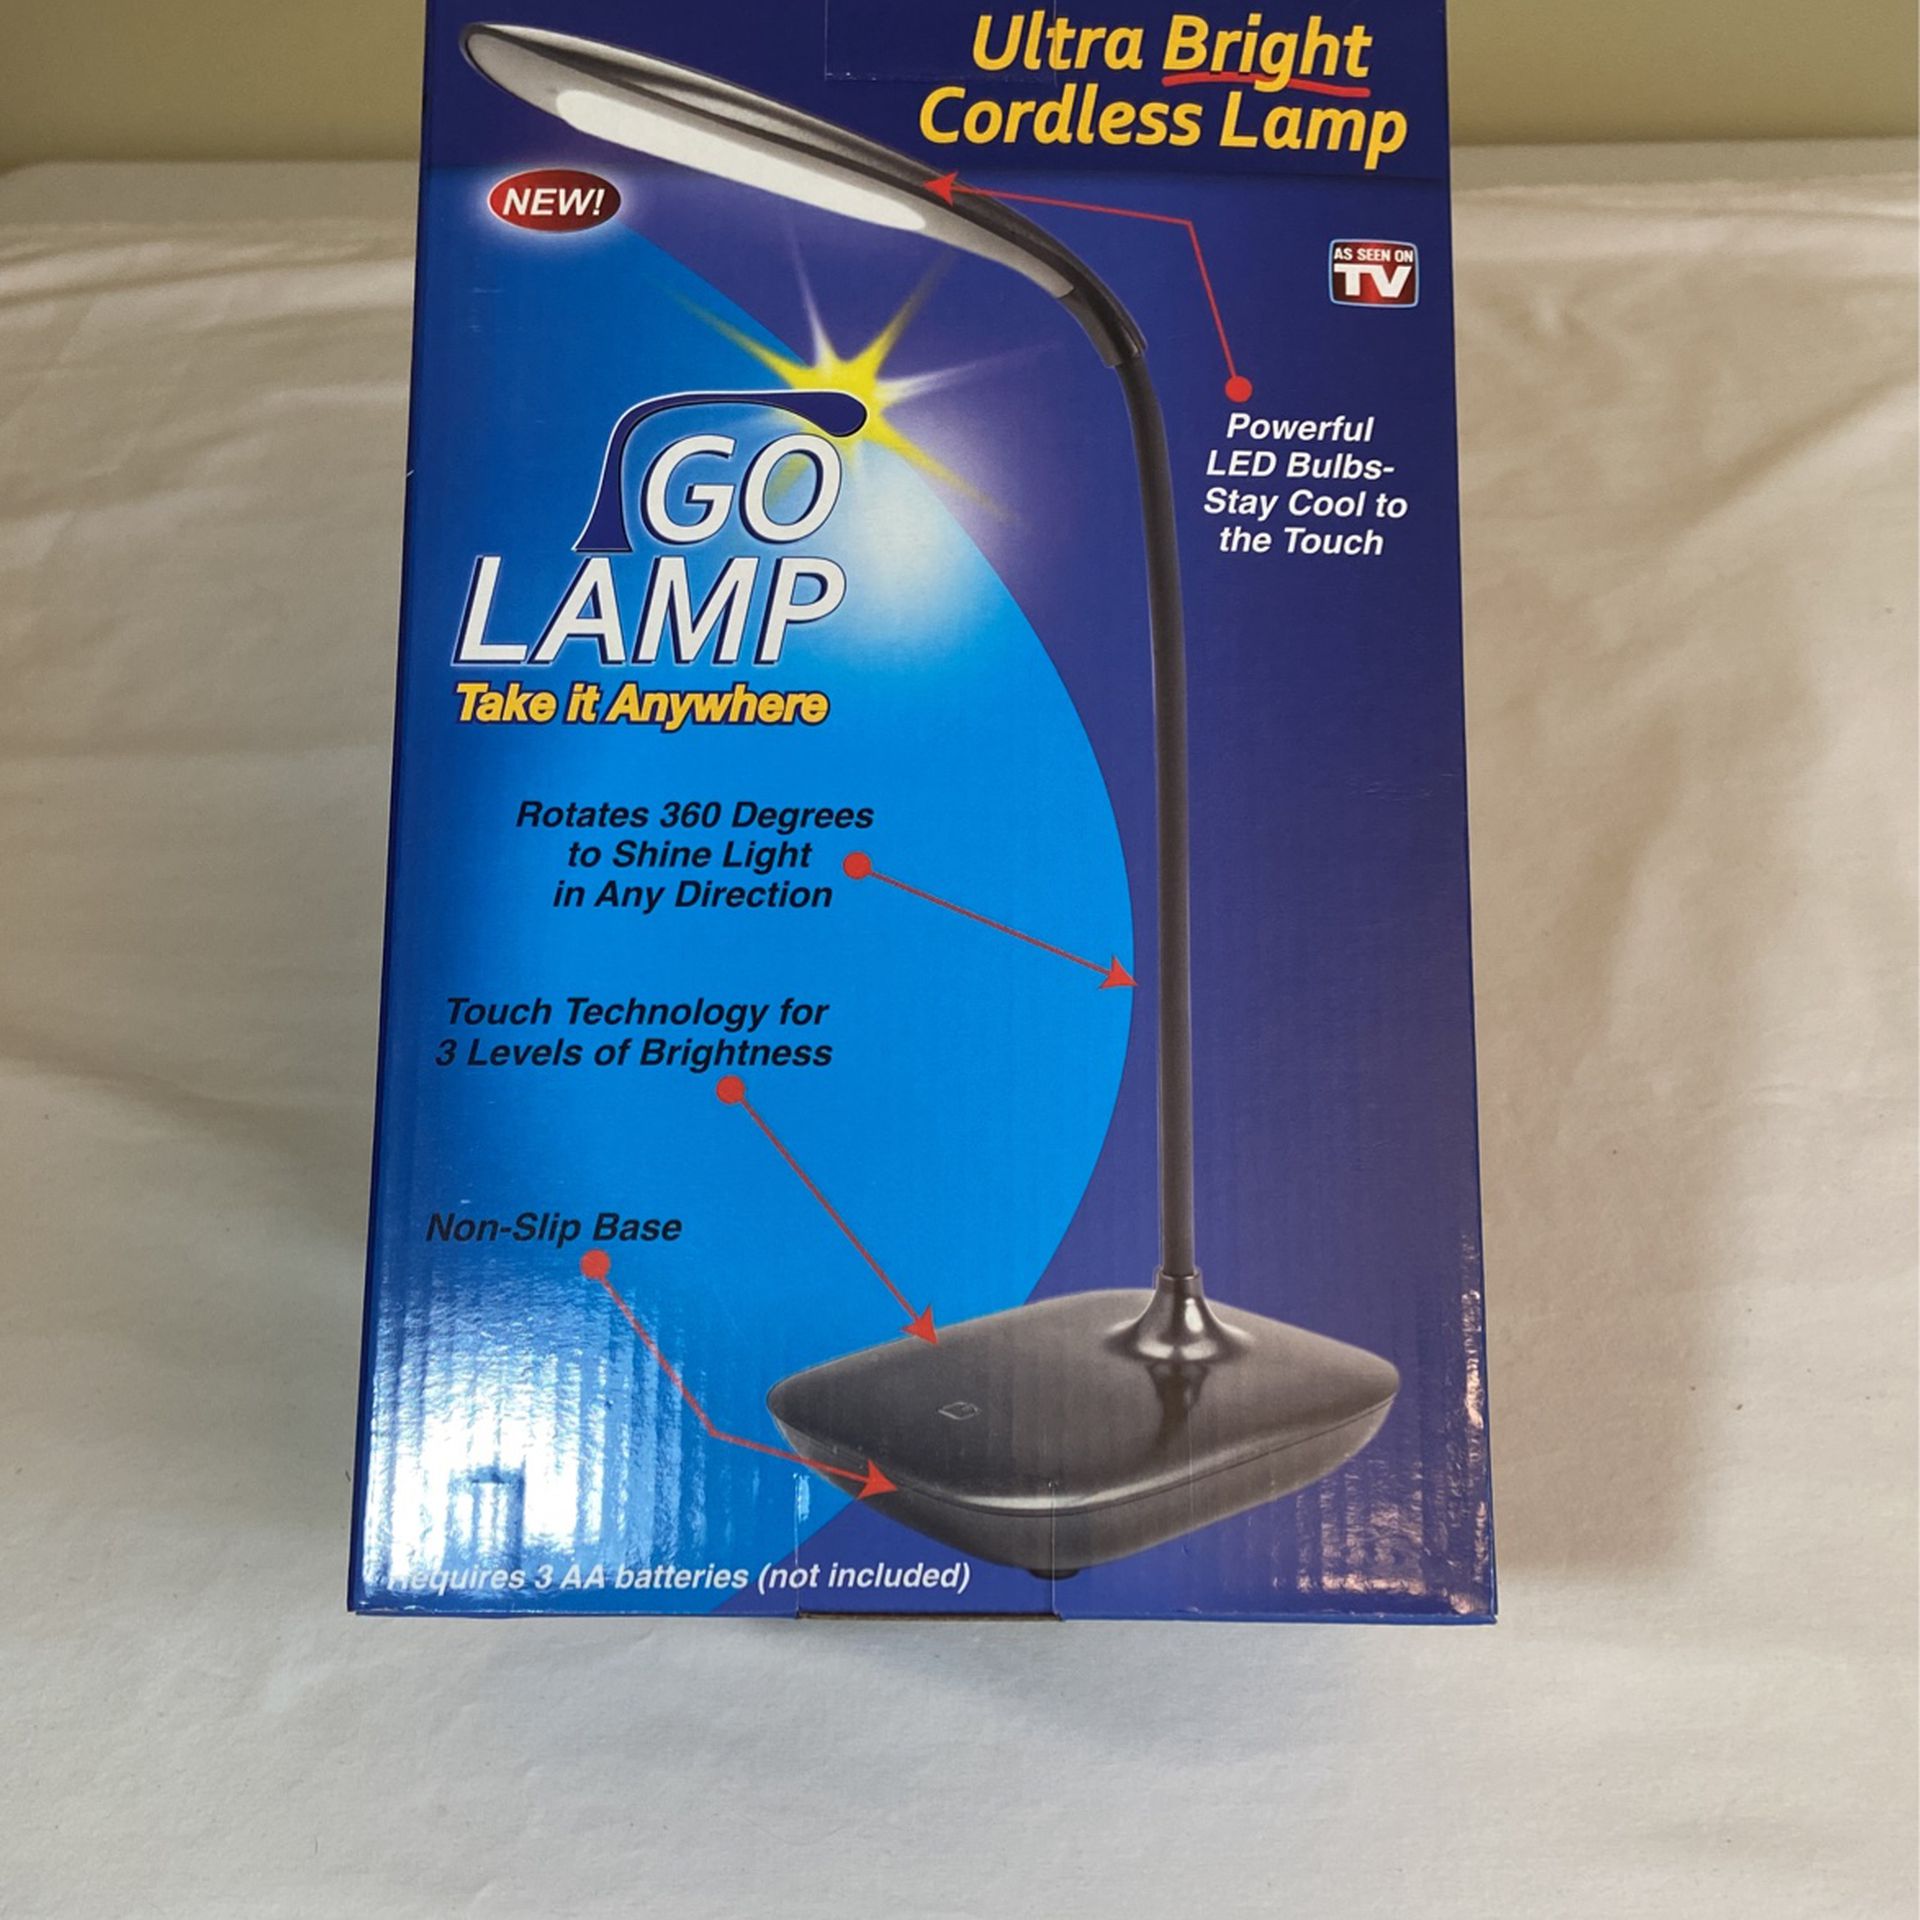 “Go Lamp” “As Seen In TV” LED Cordless Lamp